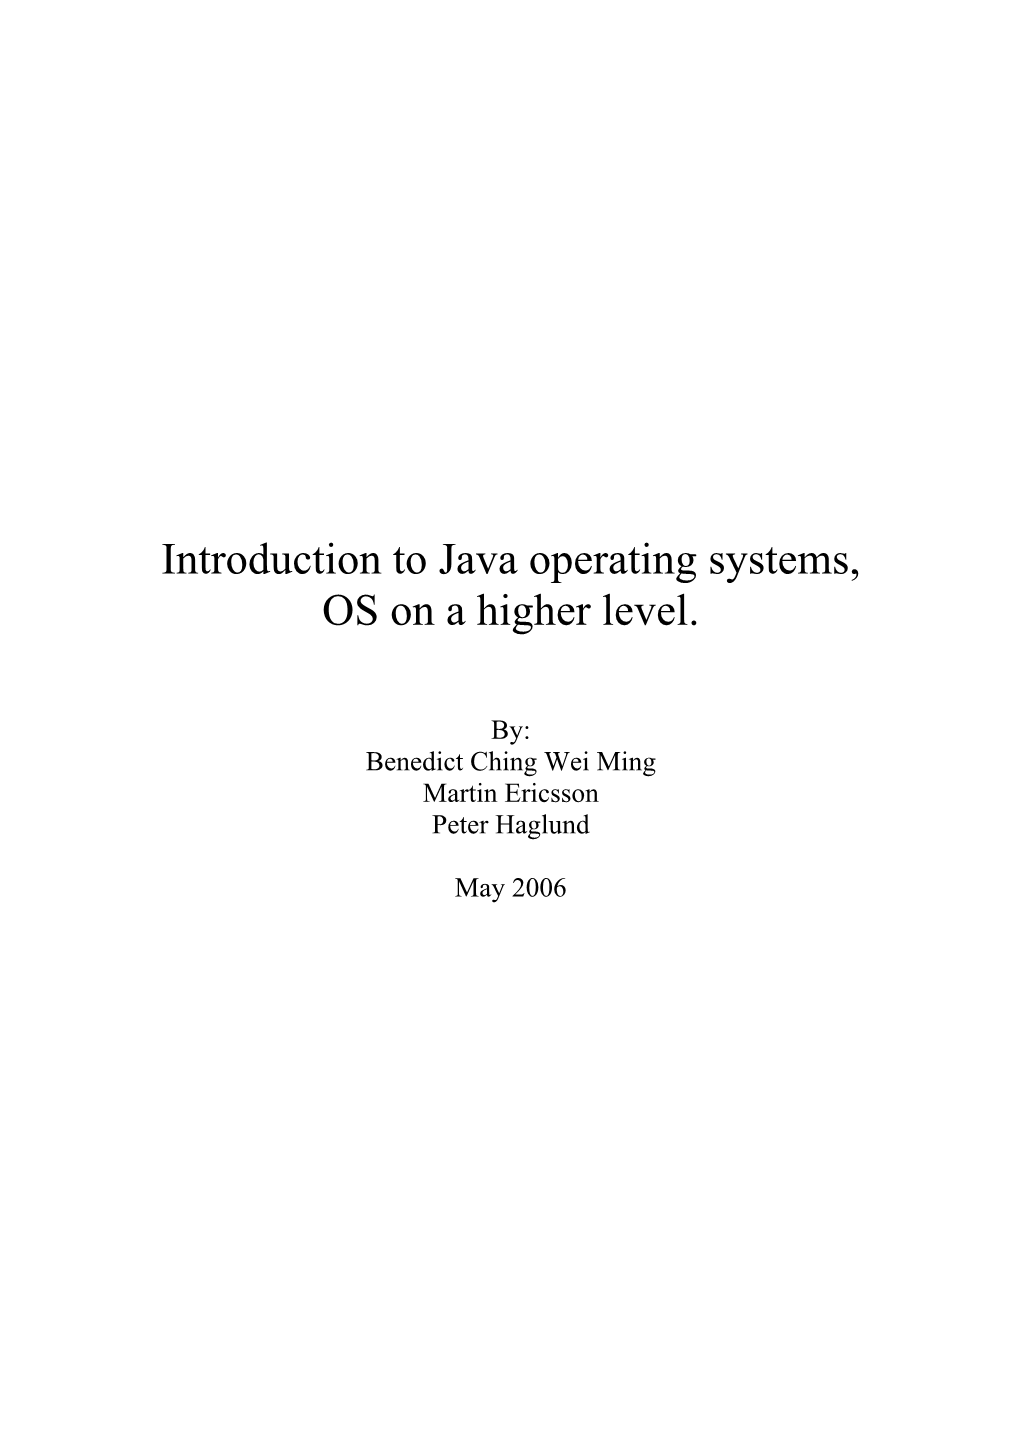 Introduction to Java Operating Systems, OS on a Higher Level